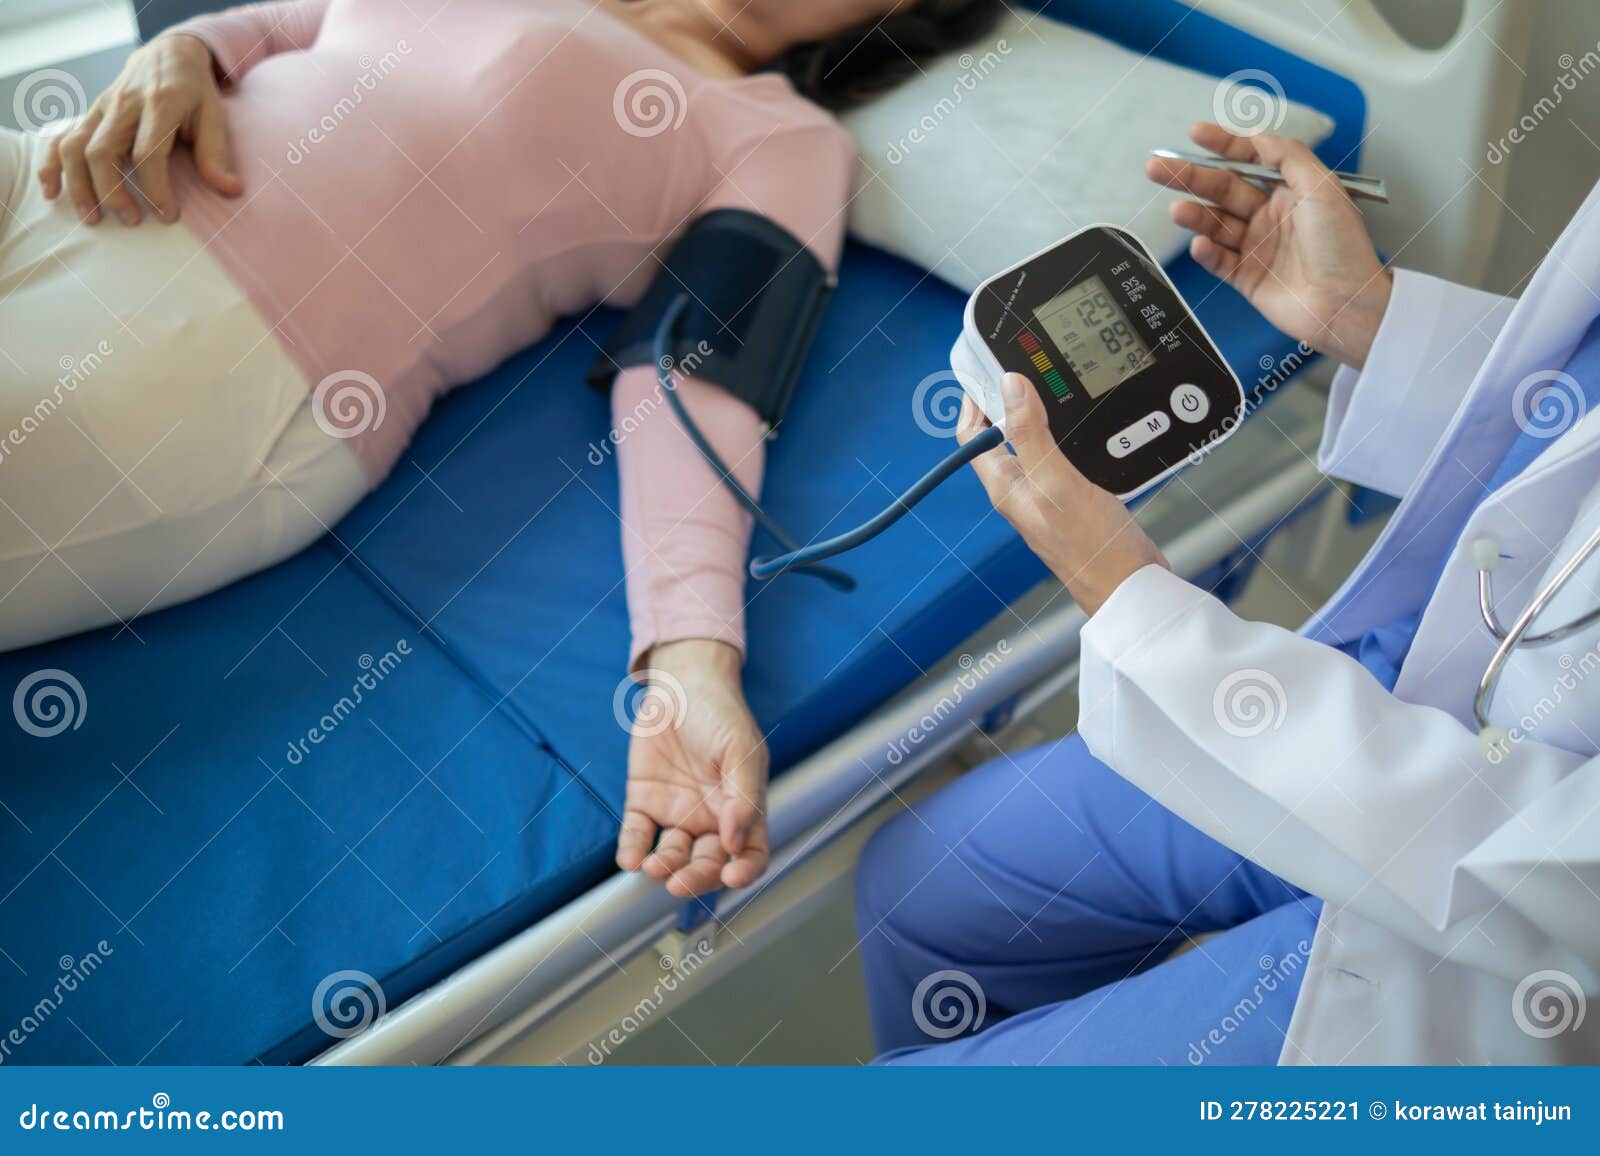 The Doctor Is Using A Blood Pressure Monitor On An Elderly Patient To